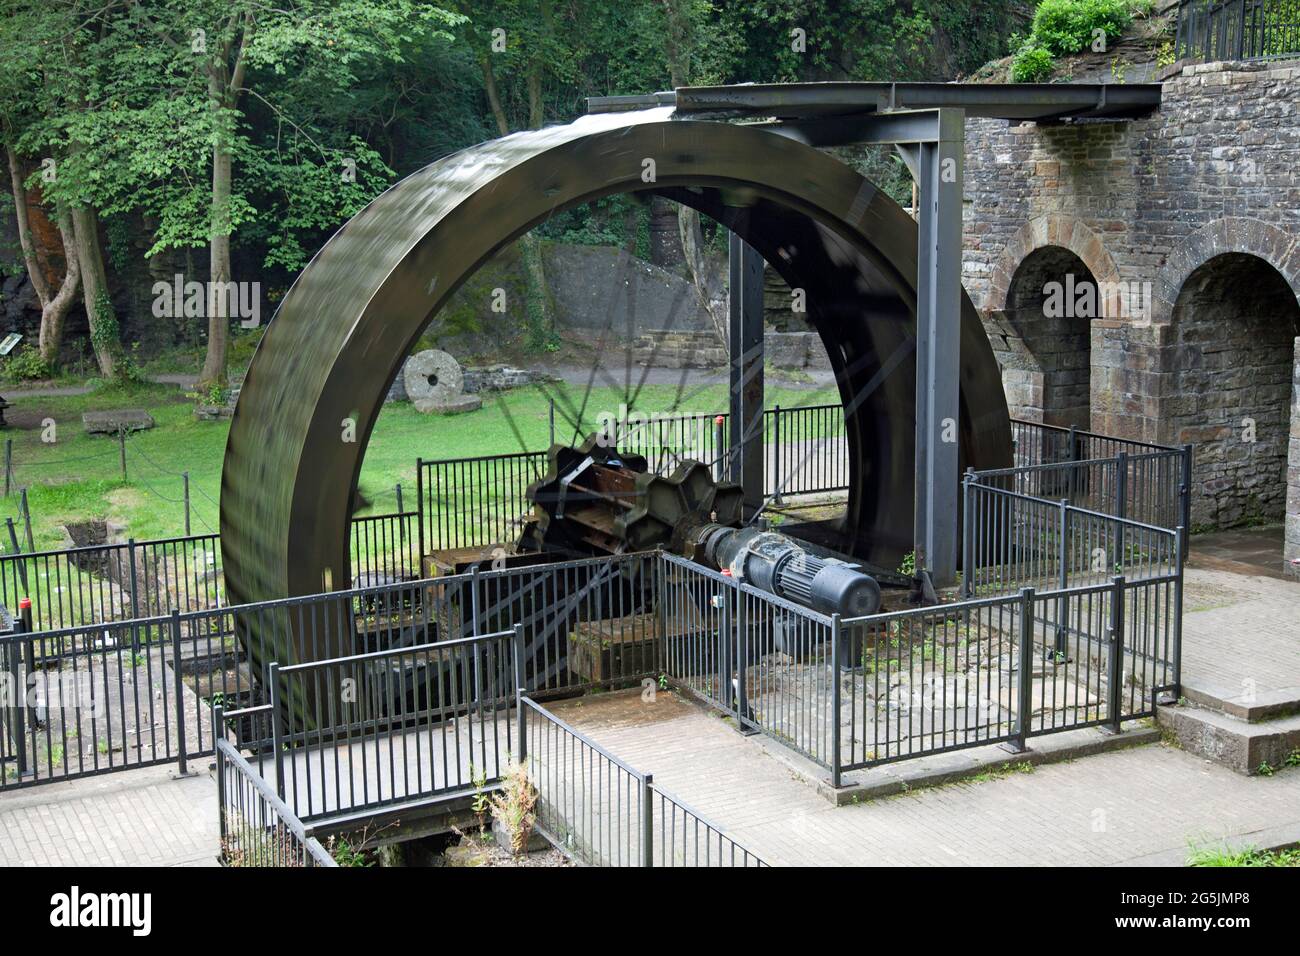 Water wheel at Aberdulais, Neath, Wales. Timed, long exposure, showing the wheel in operation Stock Photo